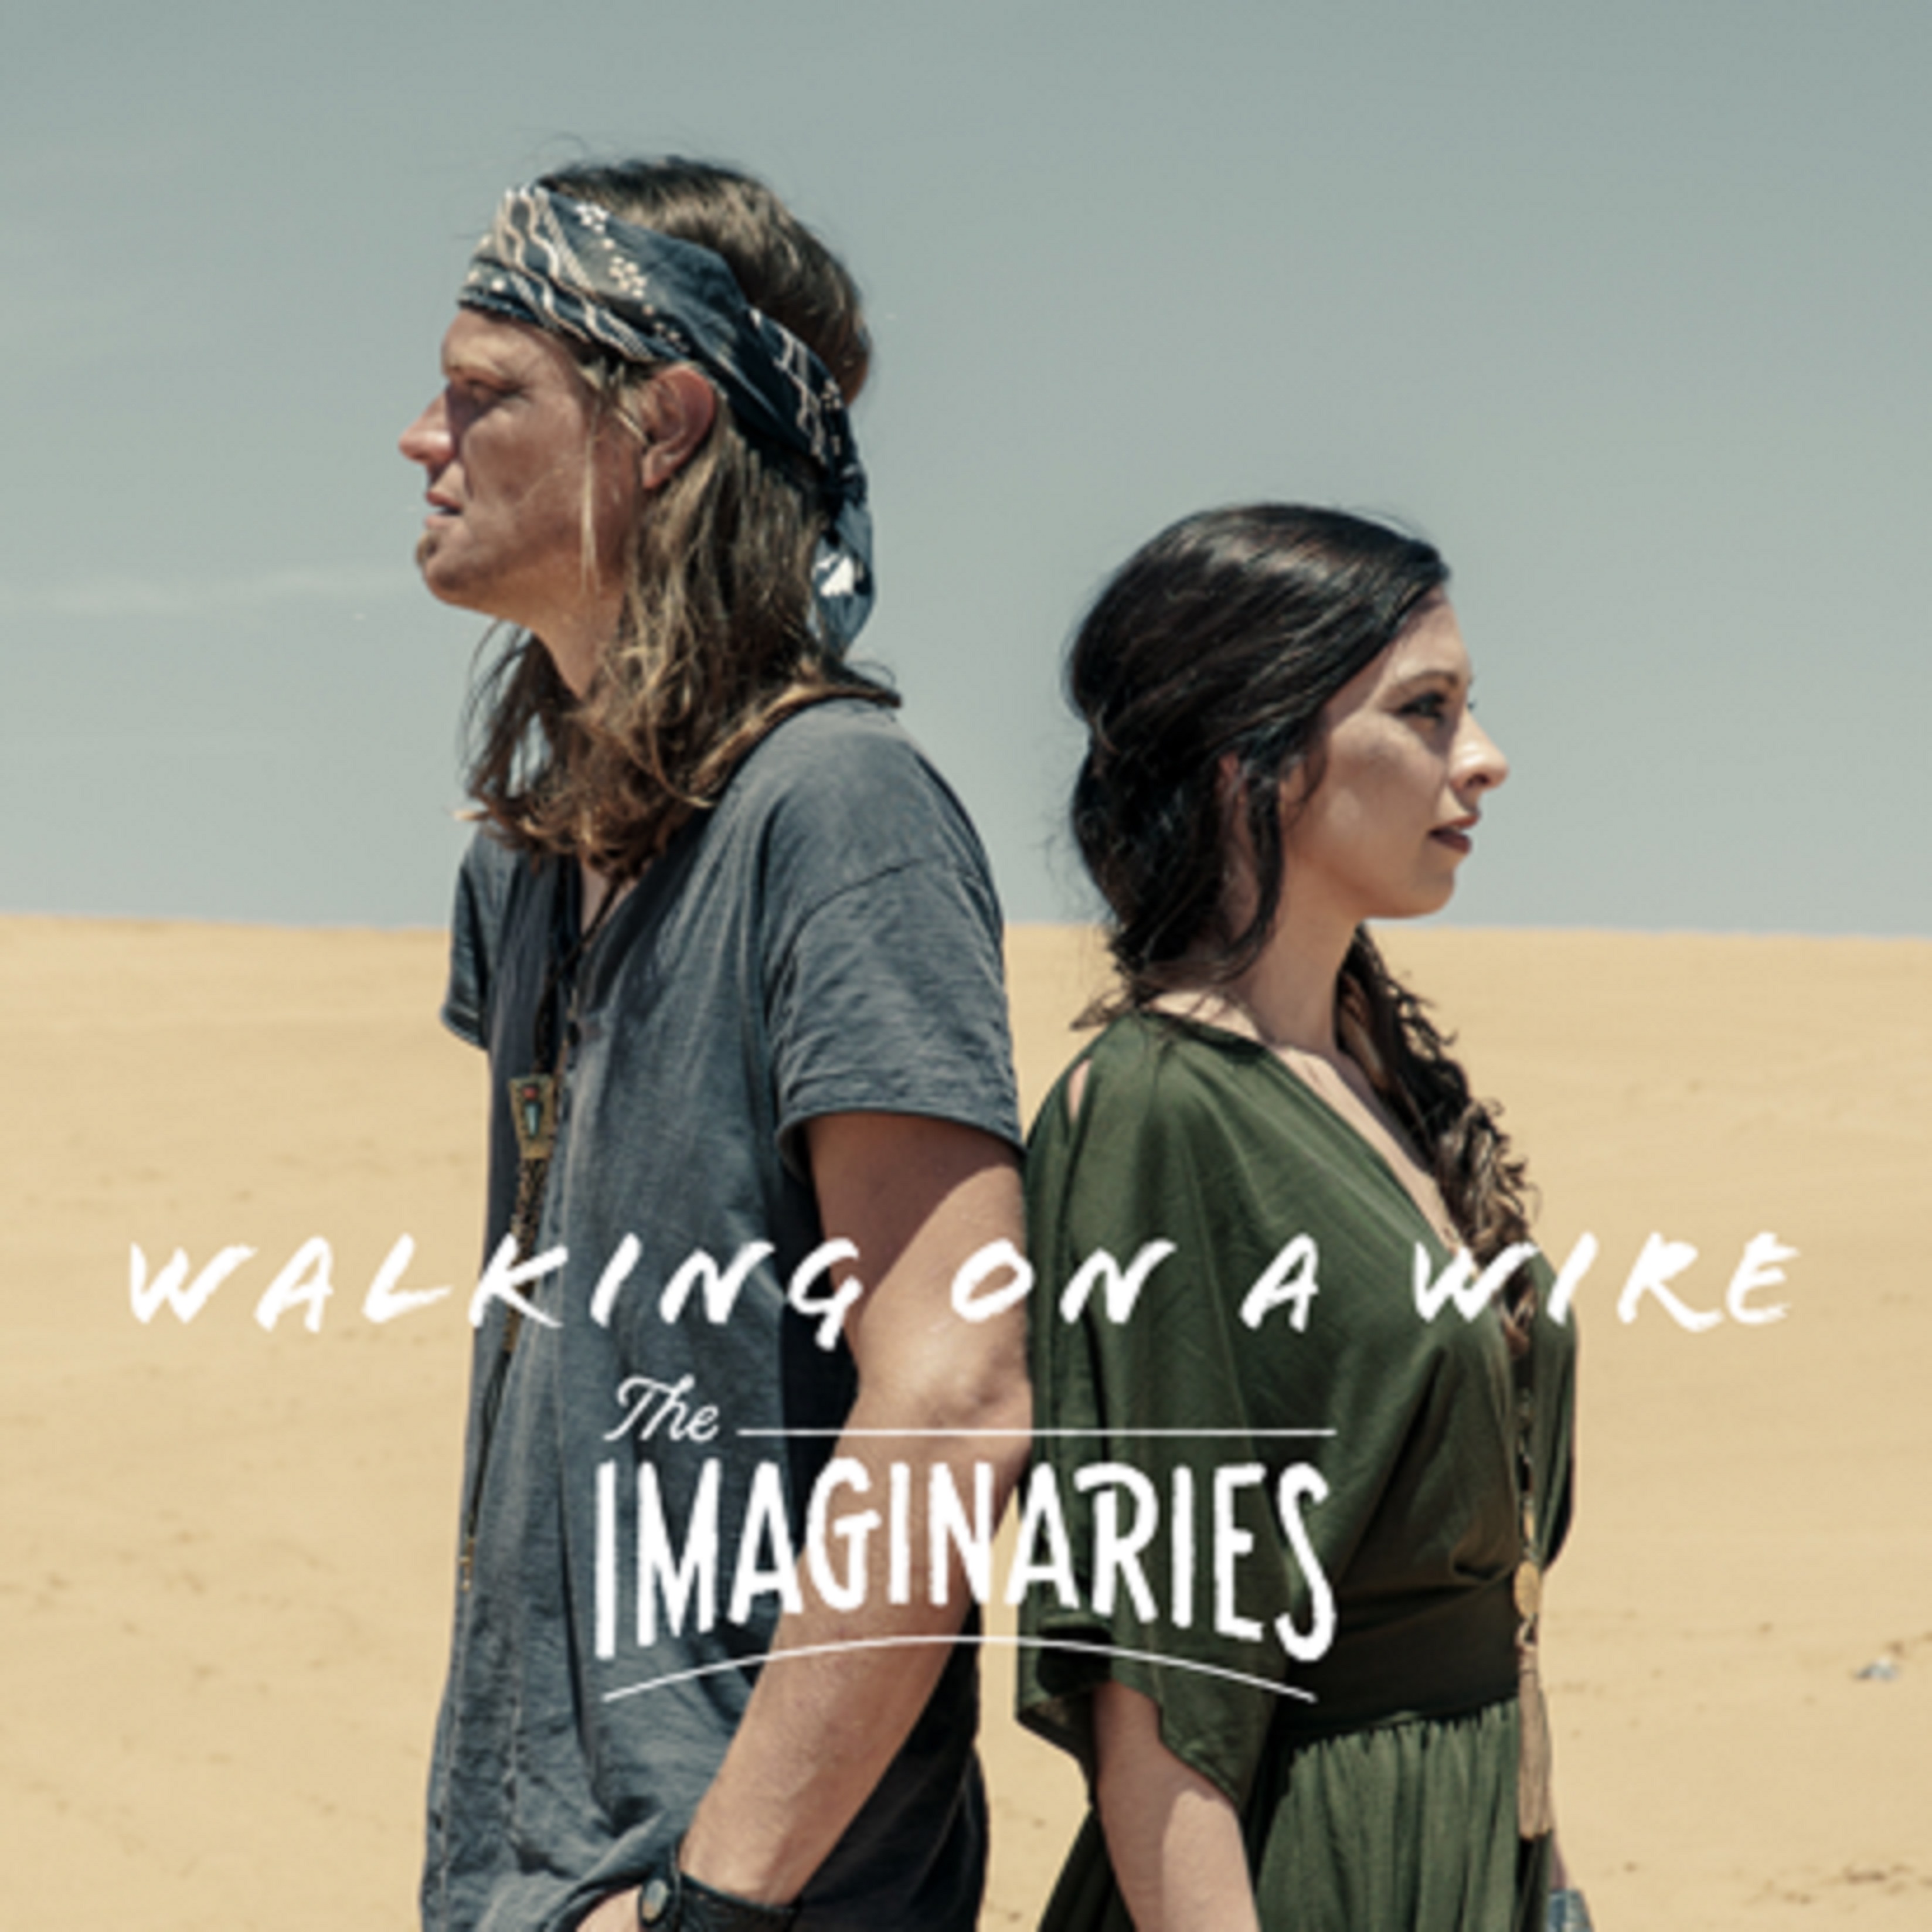 The Imaginaries Release "Walking On A Wire"